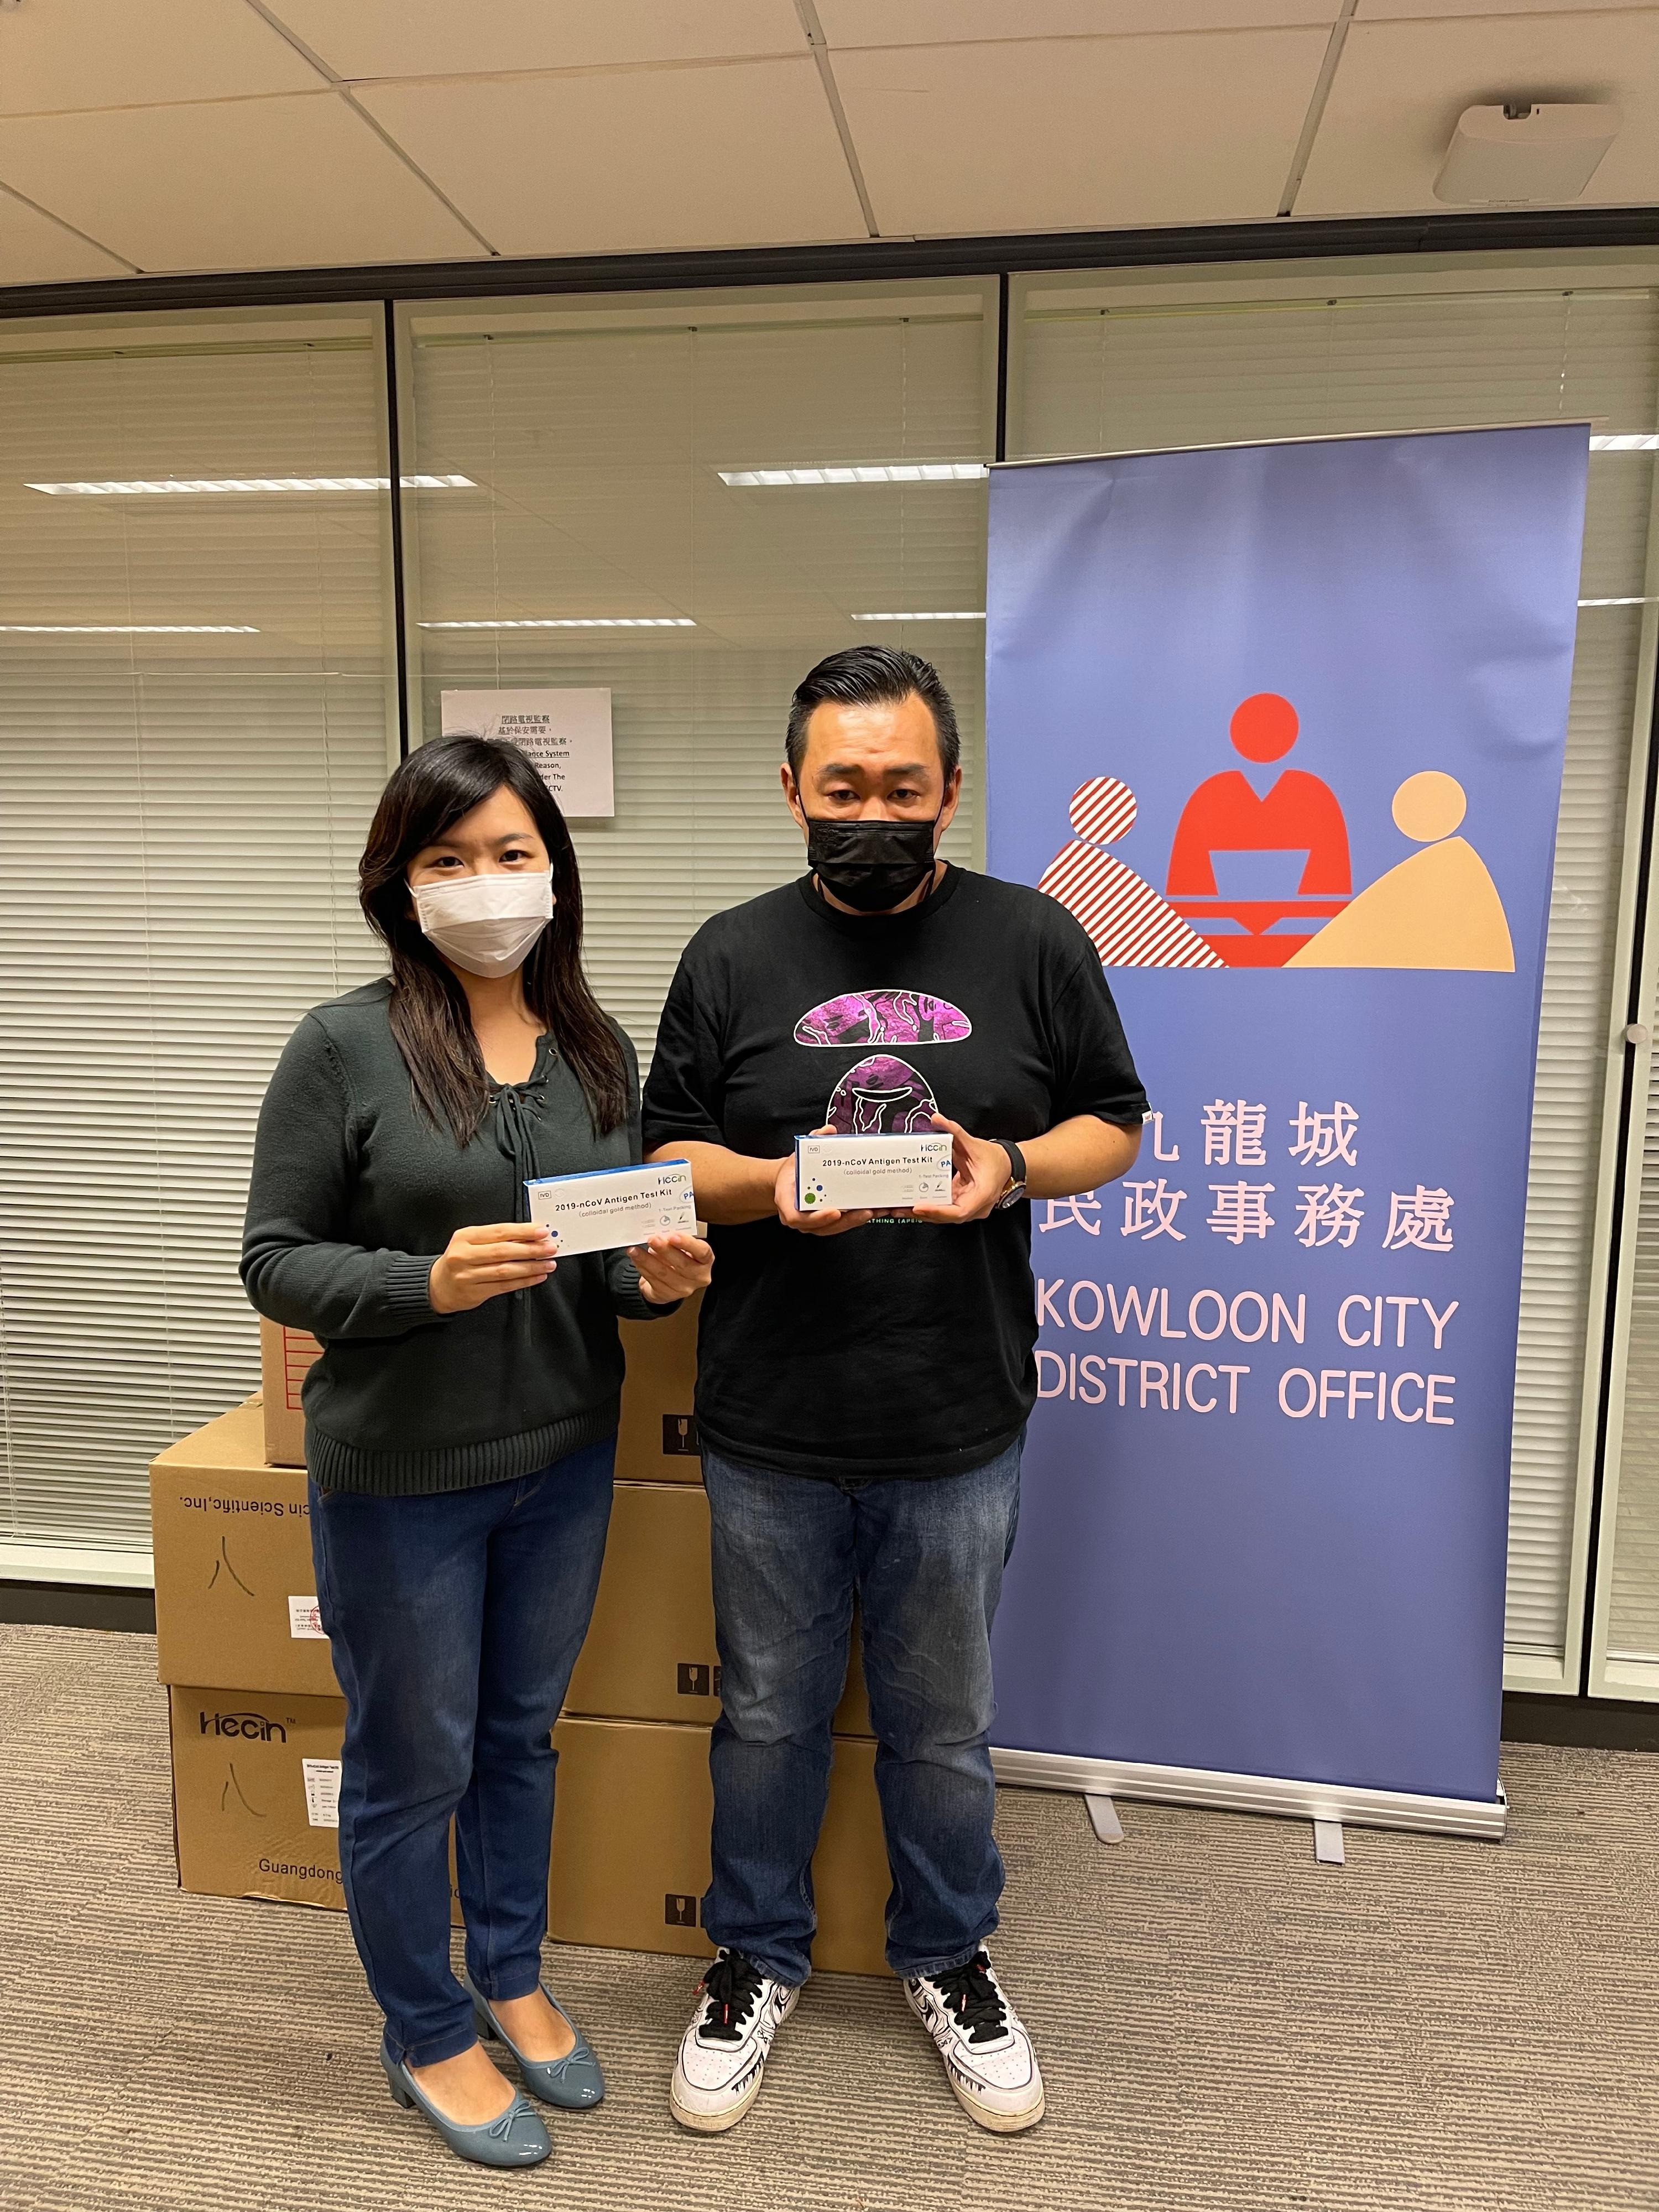 The Kowloon City District Office today (May 4) distributed COVID-19 rapid test kits to households, cleansing workers and property management staff living and working in residential premises around Tam Kung Road and Shing Tak Street for voluntary testing through the property management company.